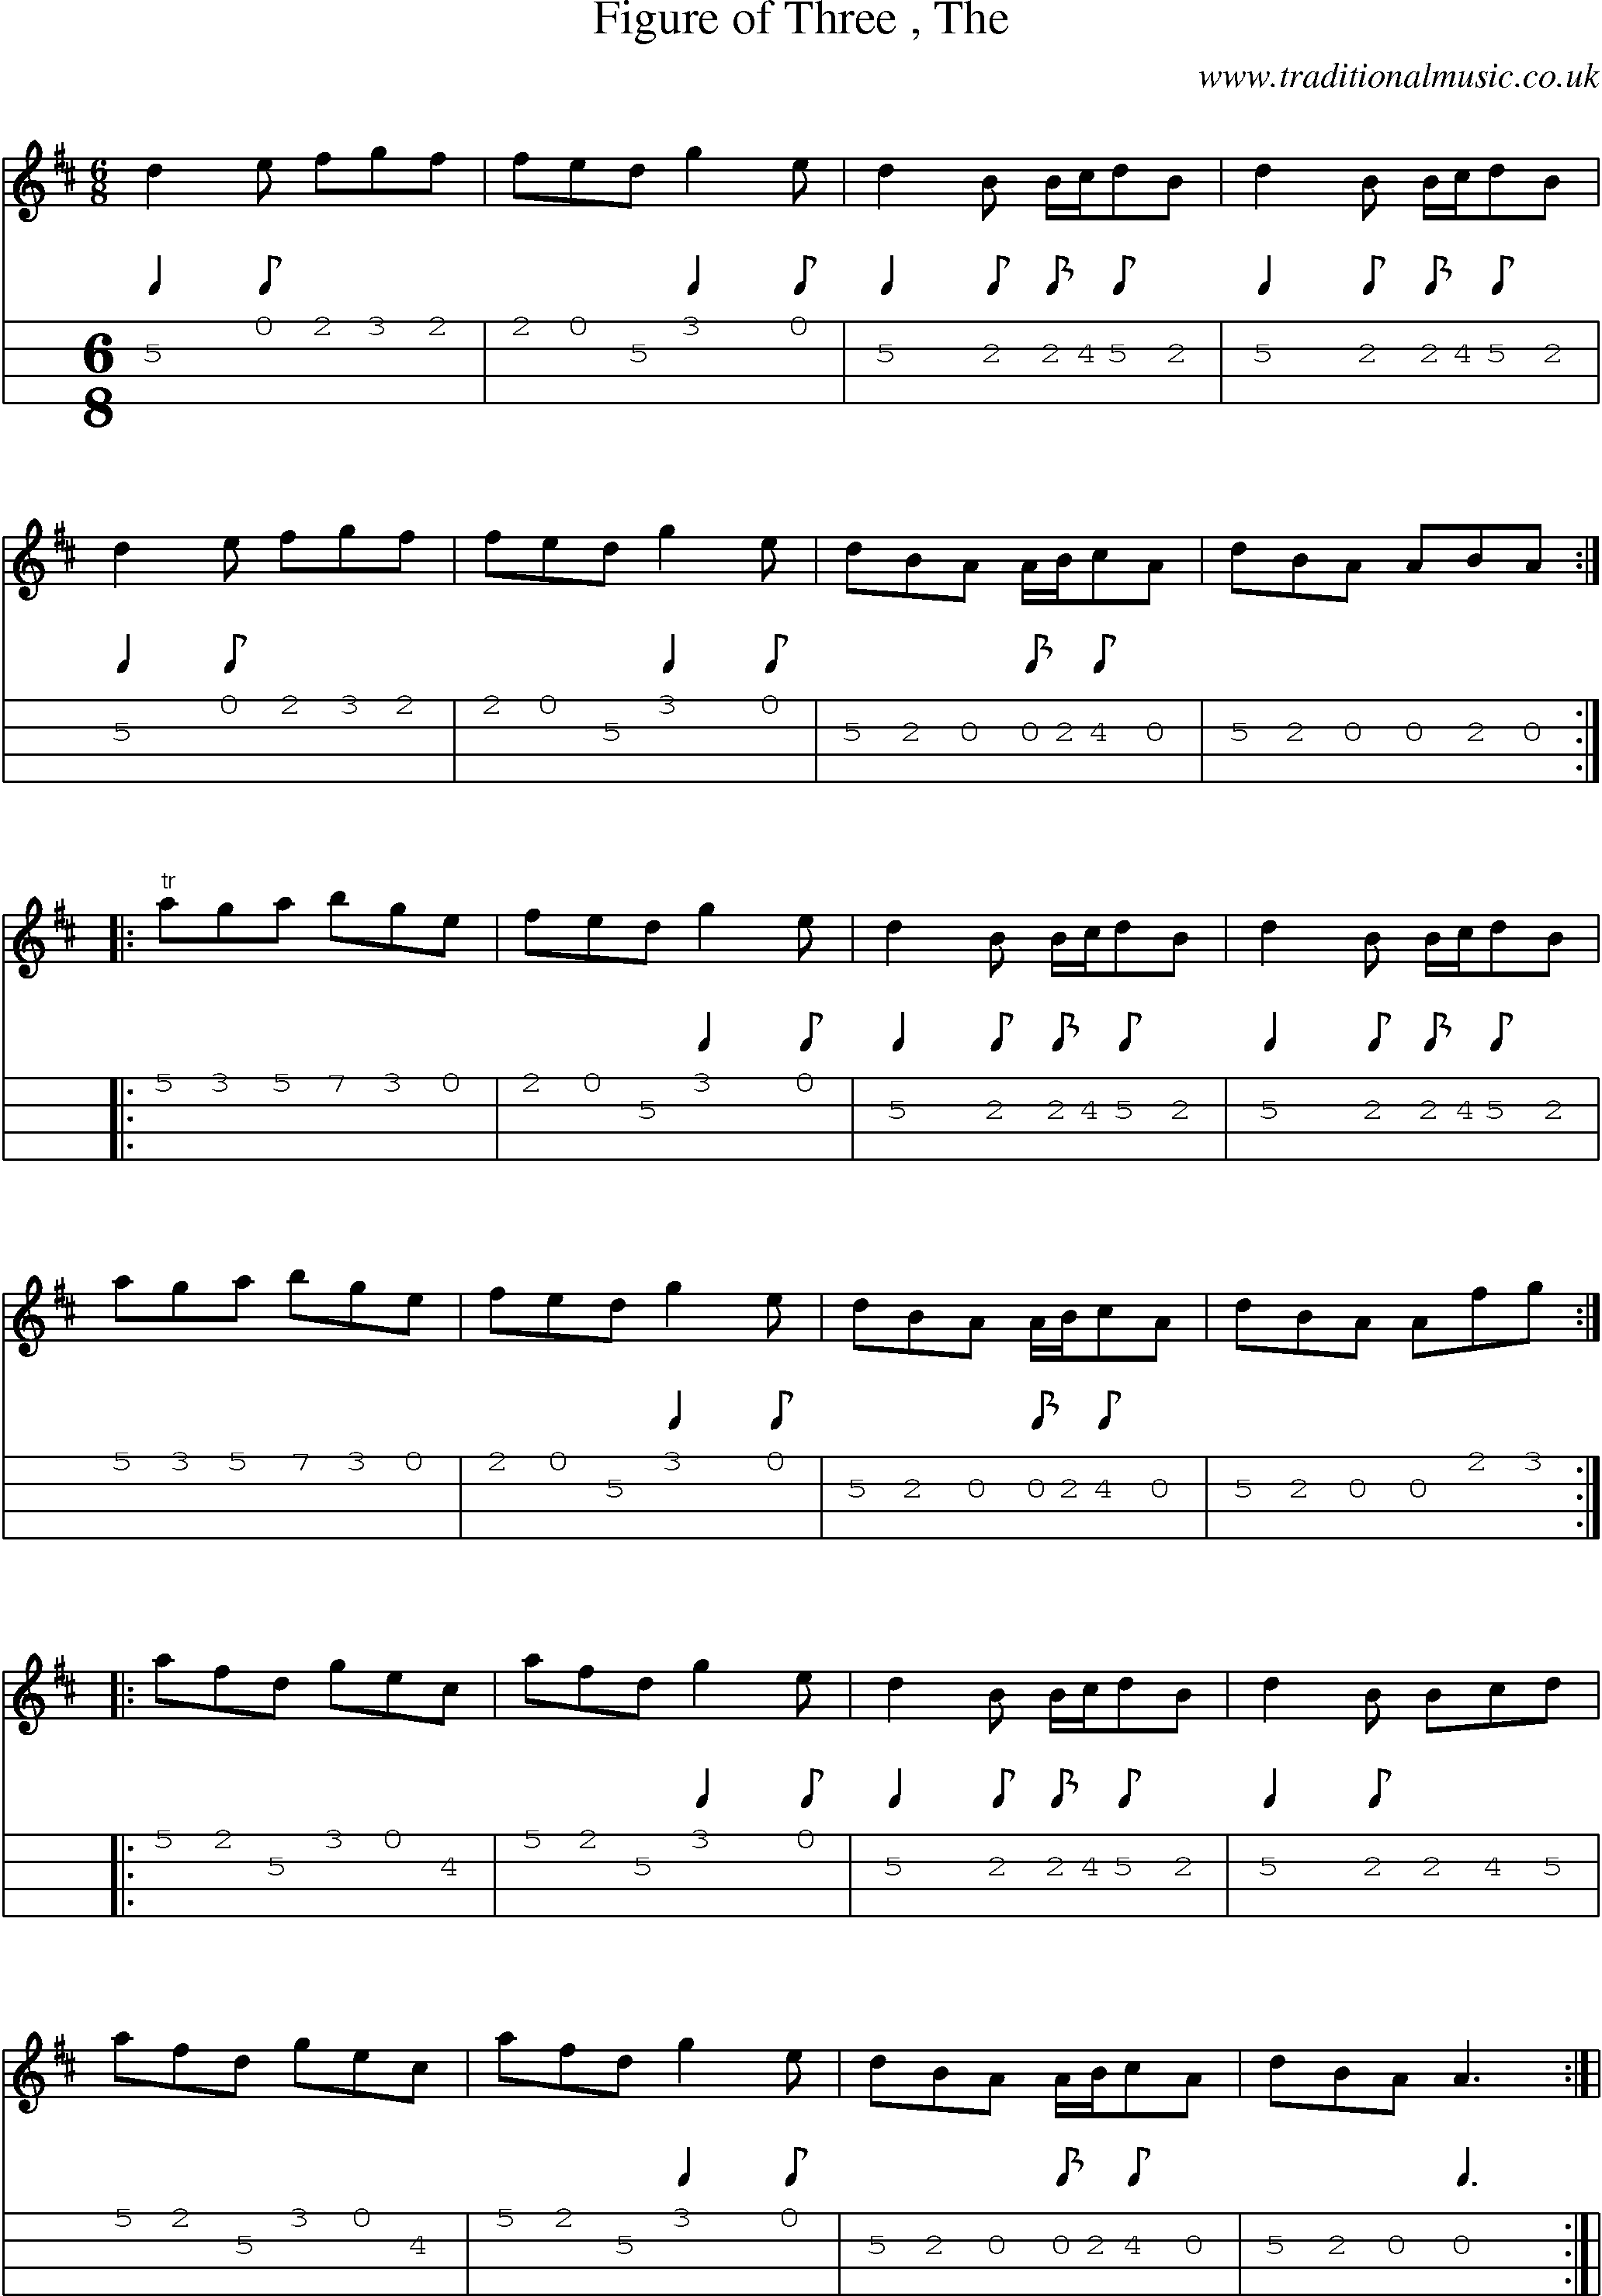 Music Score and Mandolin Tabs for Figure Of Three